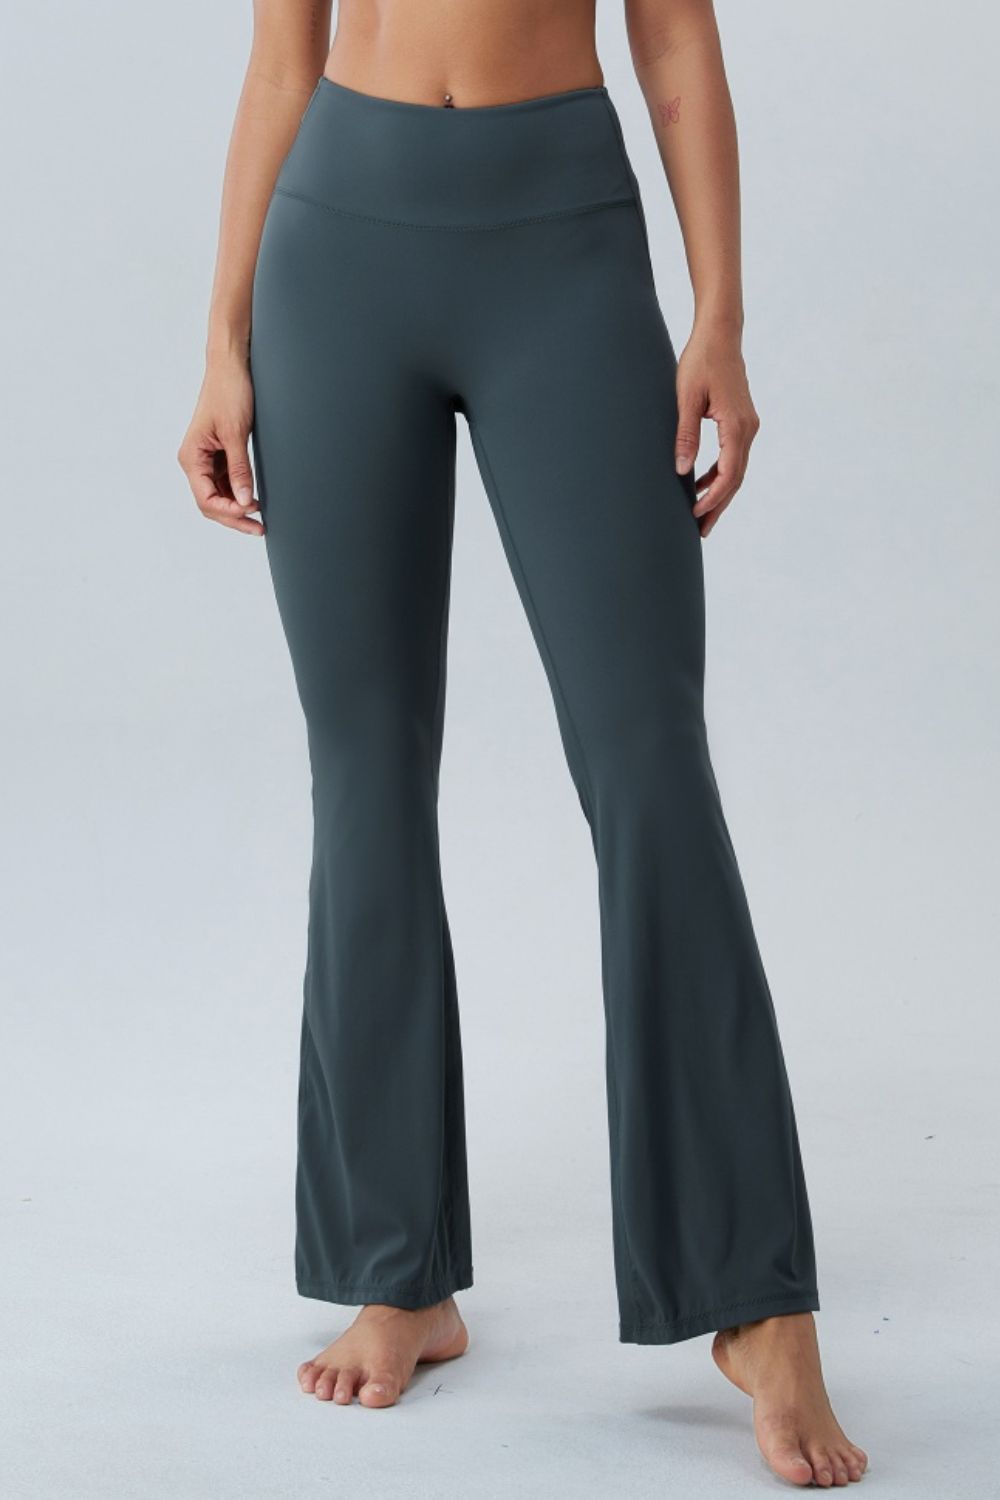 Ruched High Waist Active leggings